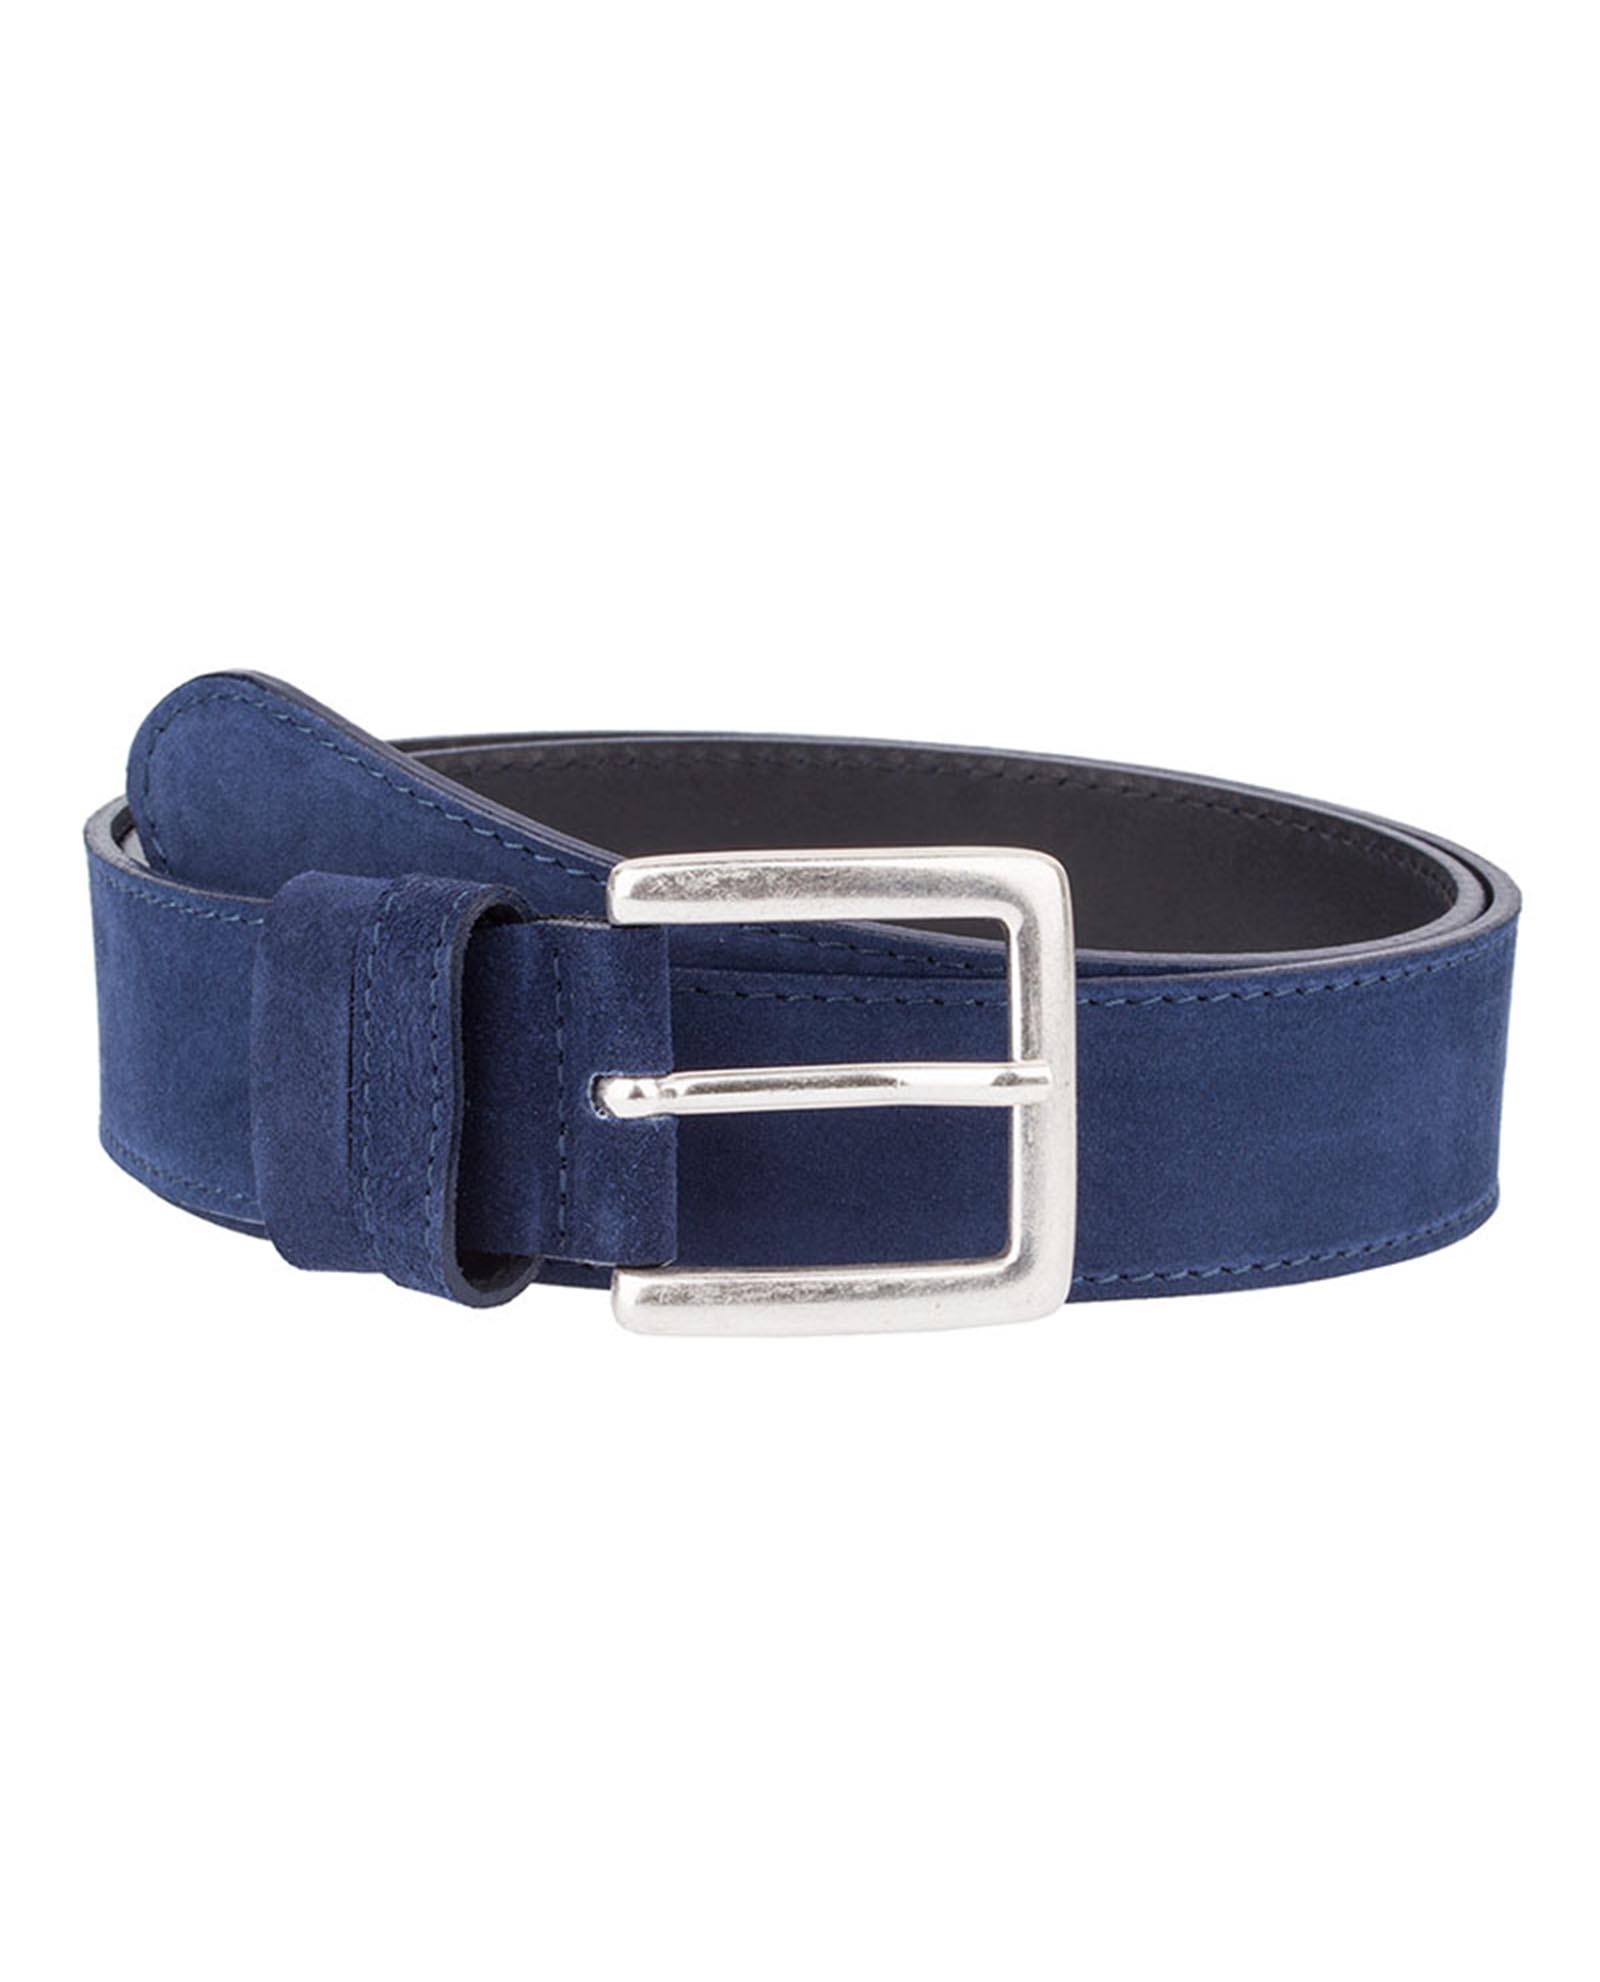 Buy Blue Suede Belt for Jeans | Wide and Thick | Free Shipping